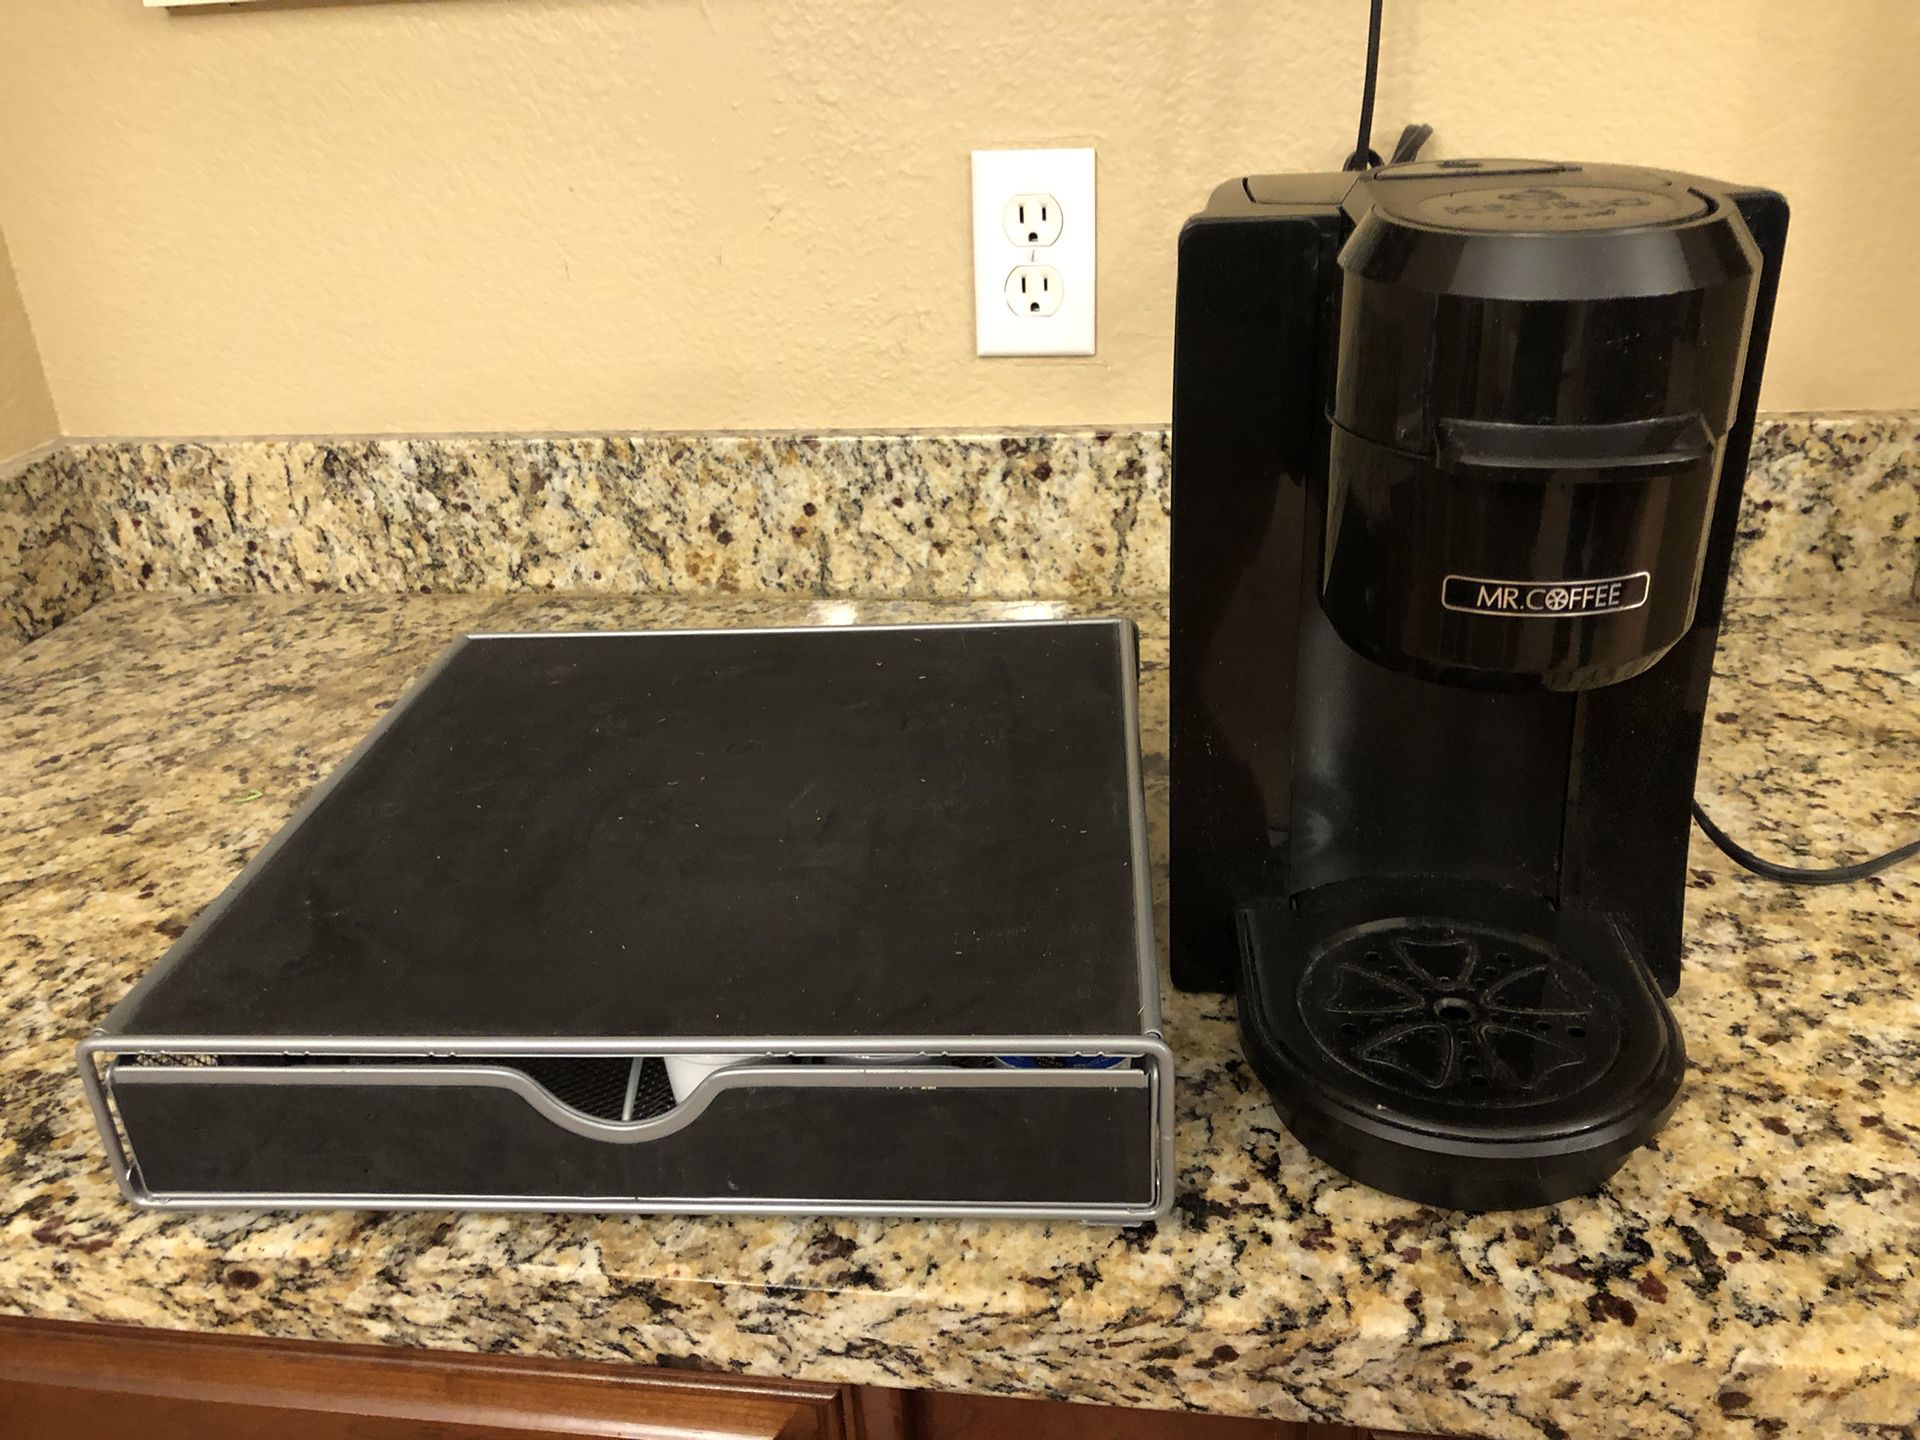 Mr Coffee K-cup Coffee Maker With Storage Drawer